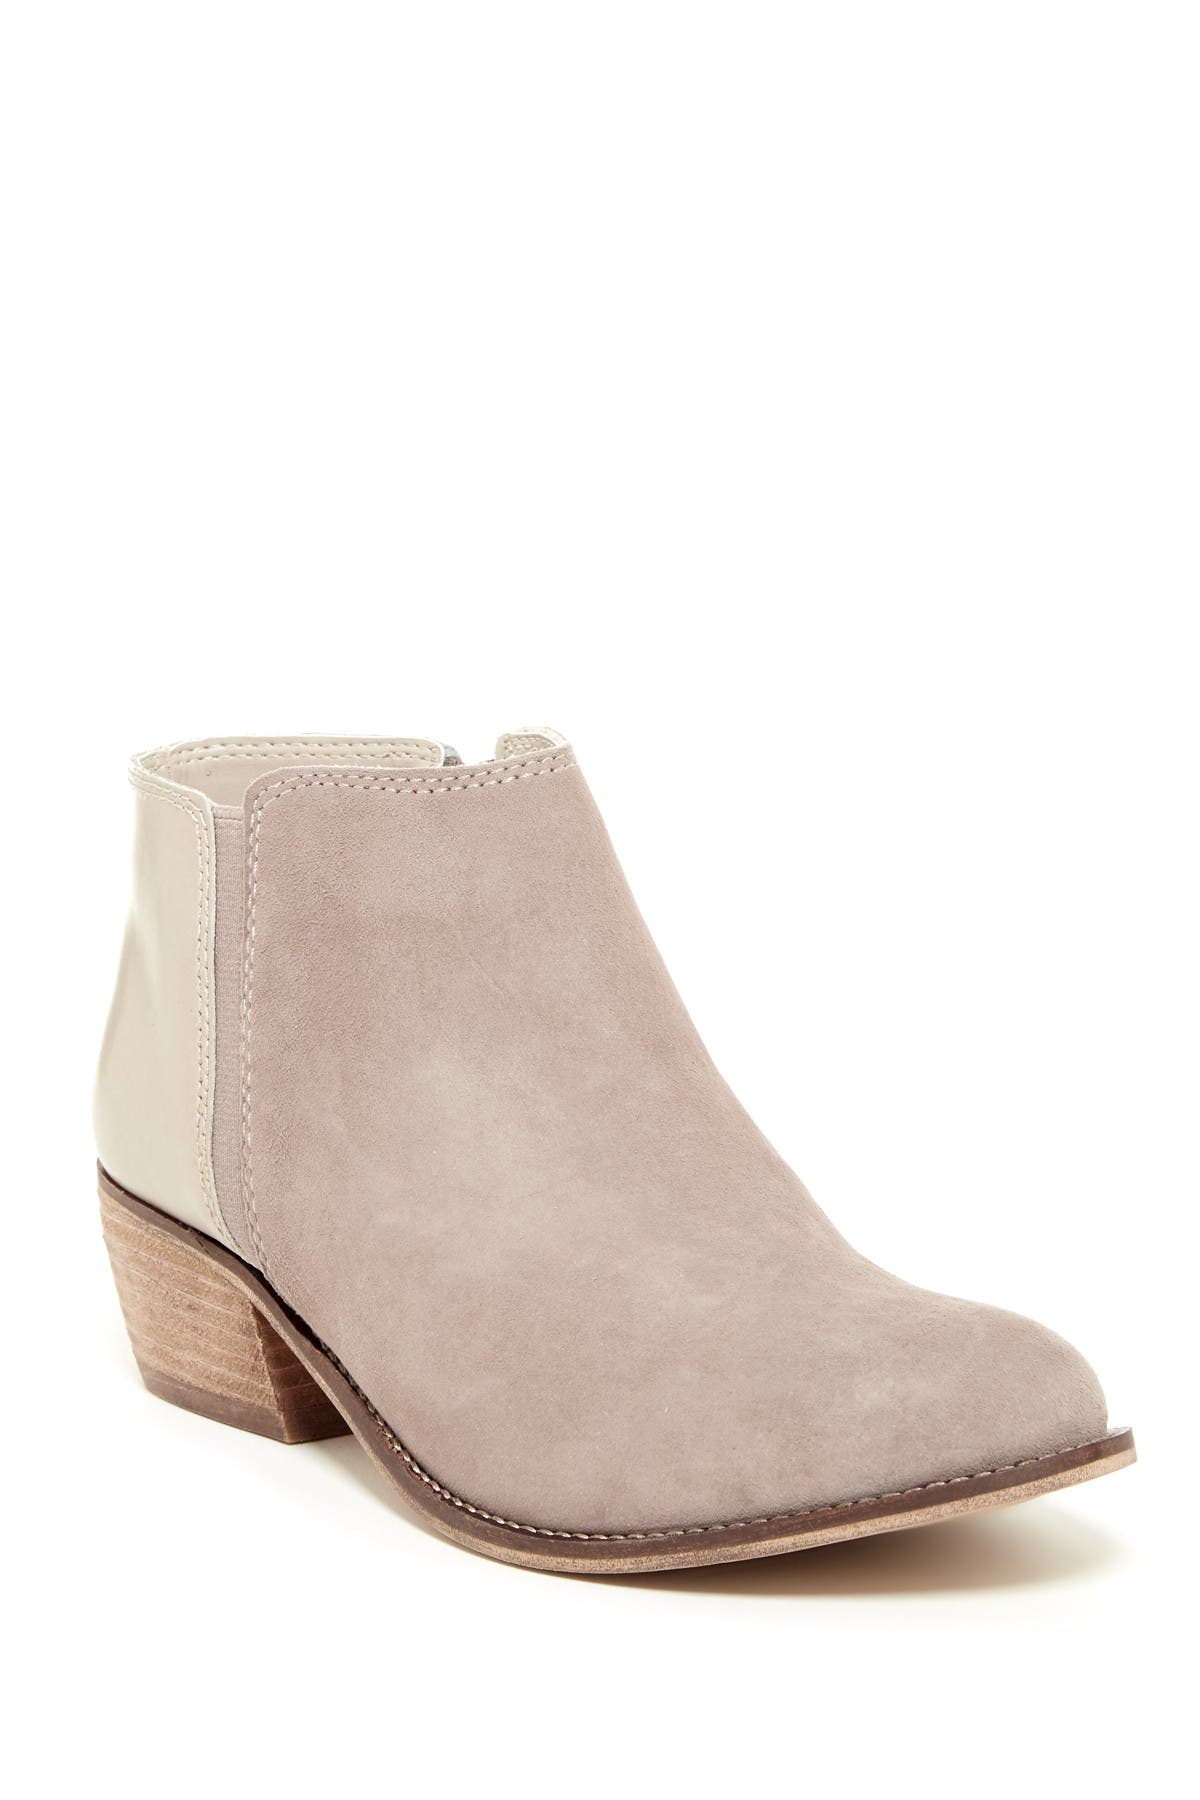 dune grey suede ankle boots